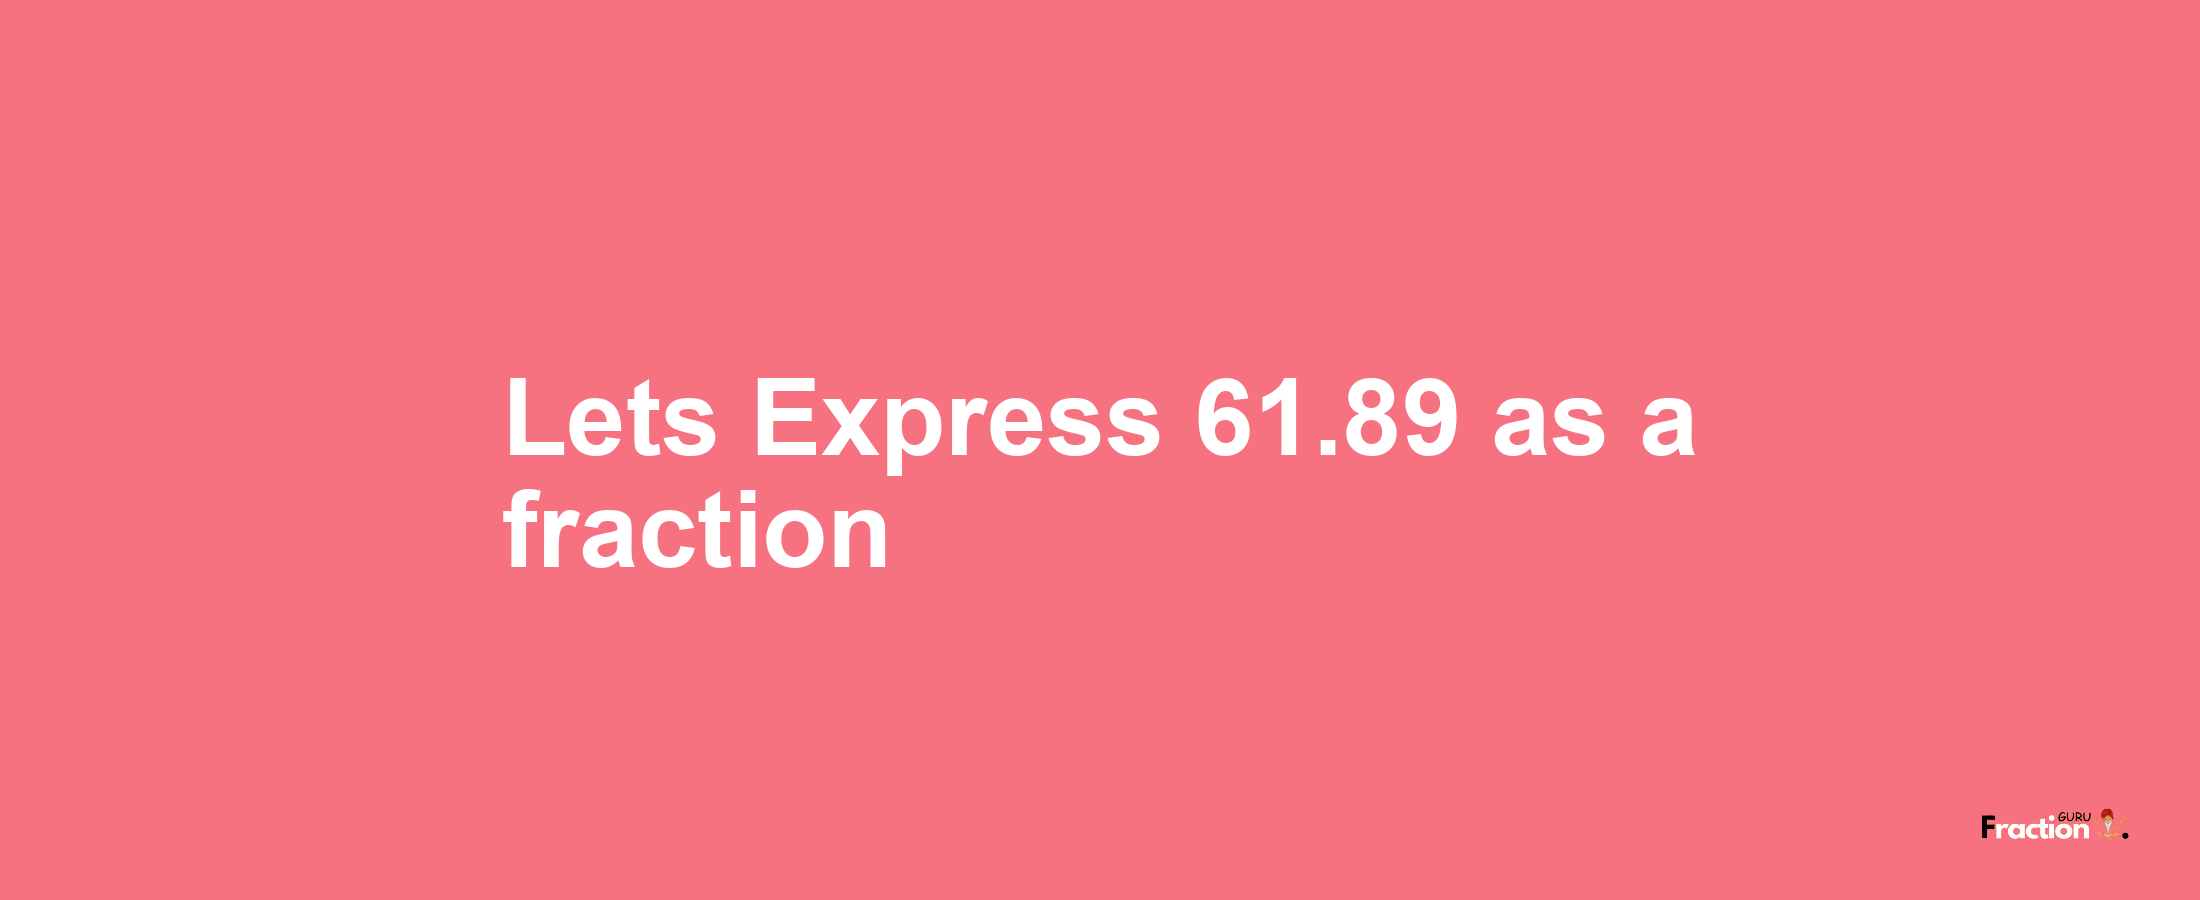 Lets Express 61.89 as afraction